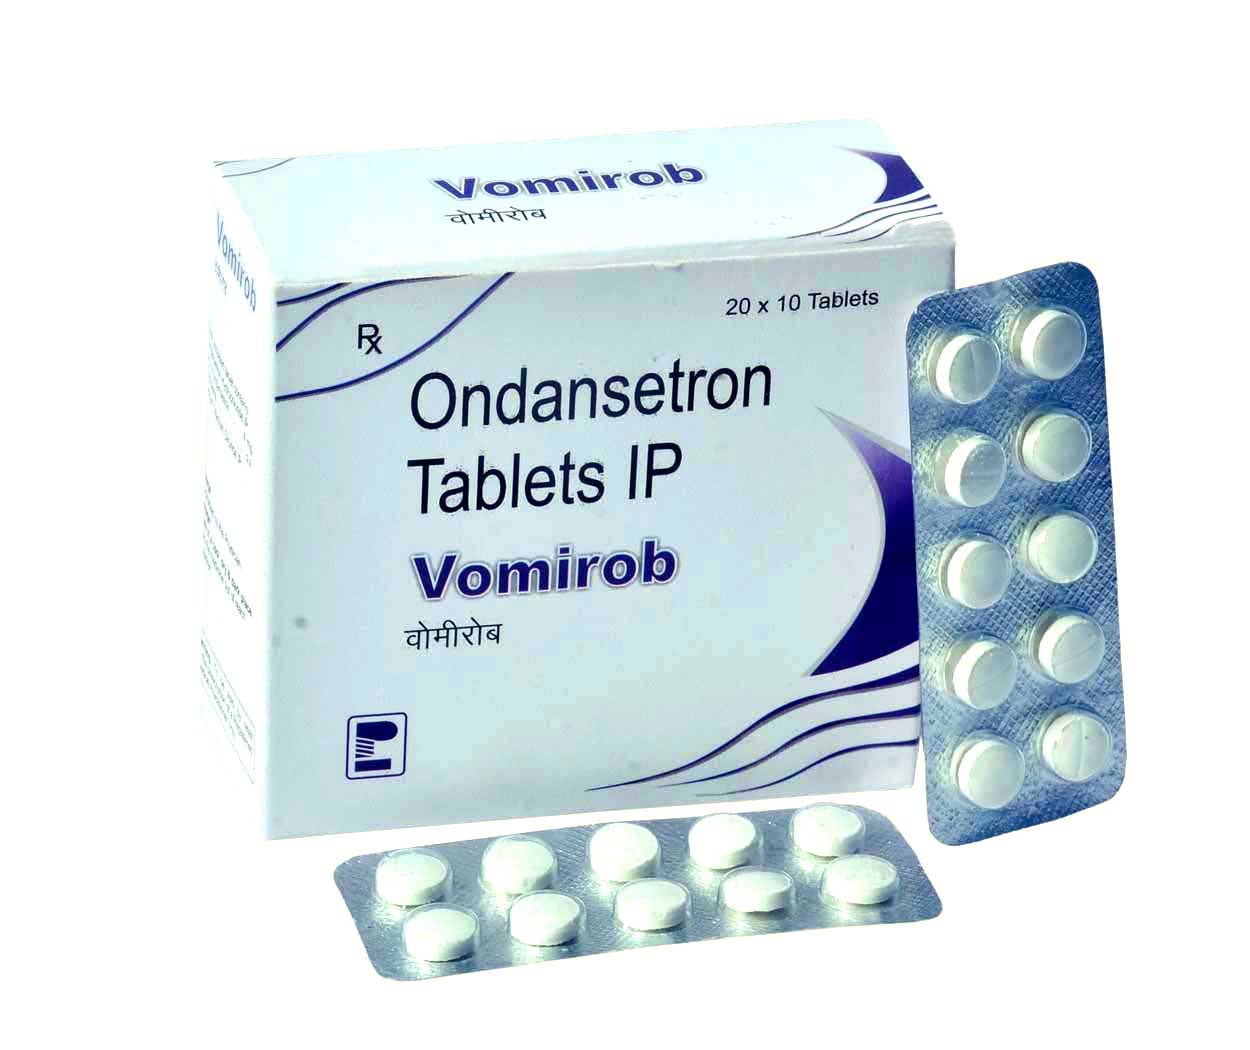 Product Name: Vomirob, Compositions of Vomirob are Ondansetron Tablets IP - Park Pharmaceuticals